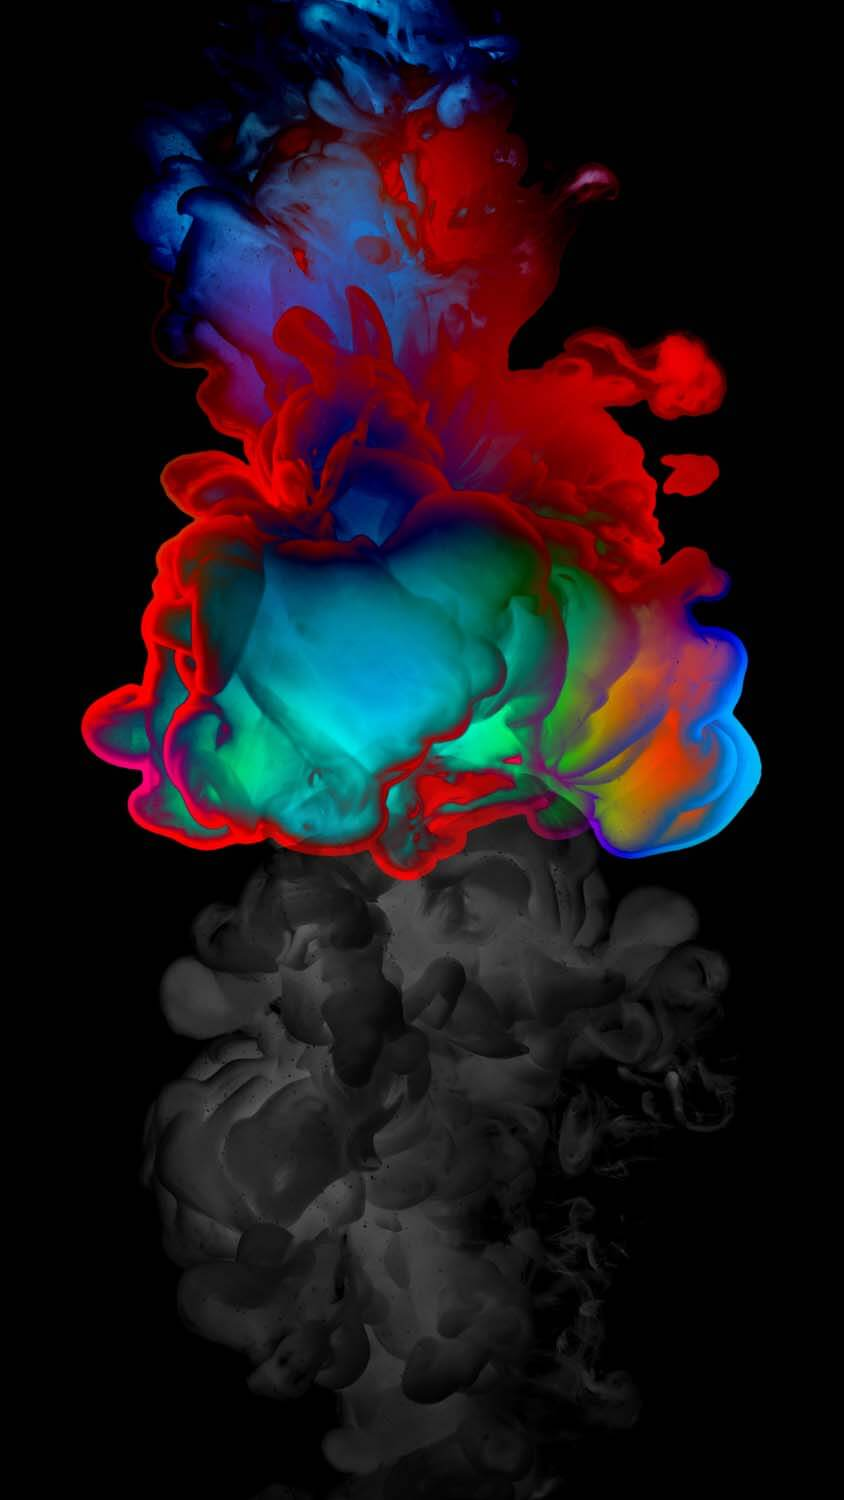 Colorful Smoke IPhone Wallpaper HD  IPhone Wallpapers